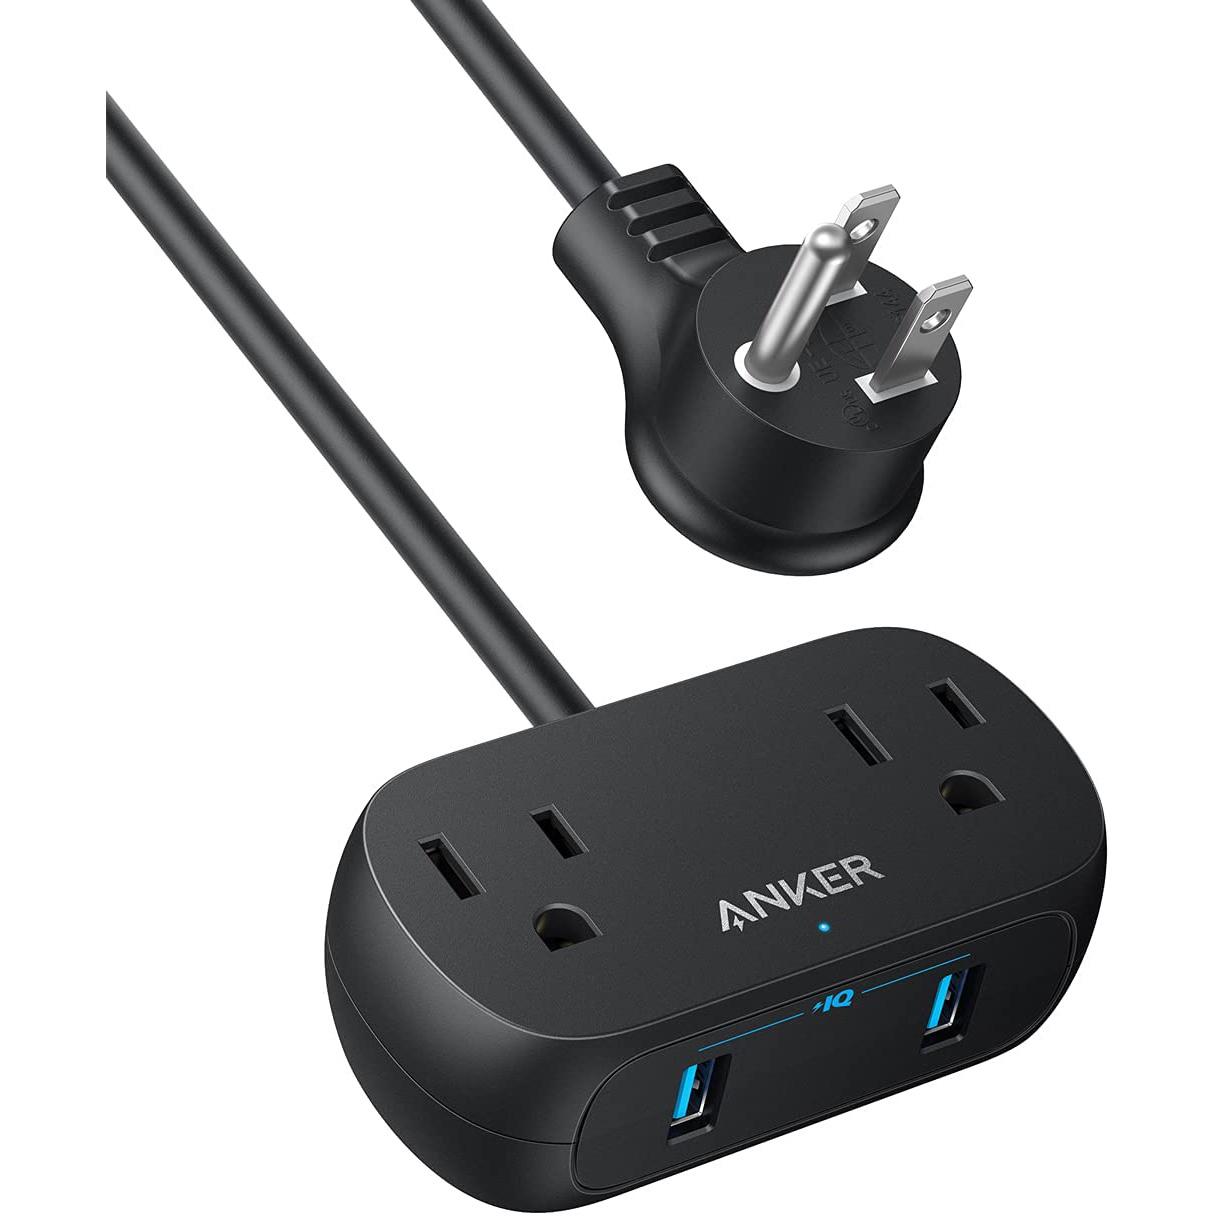 Anker Flat Plug Extension Cord with 2 Outlets for $10.99